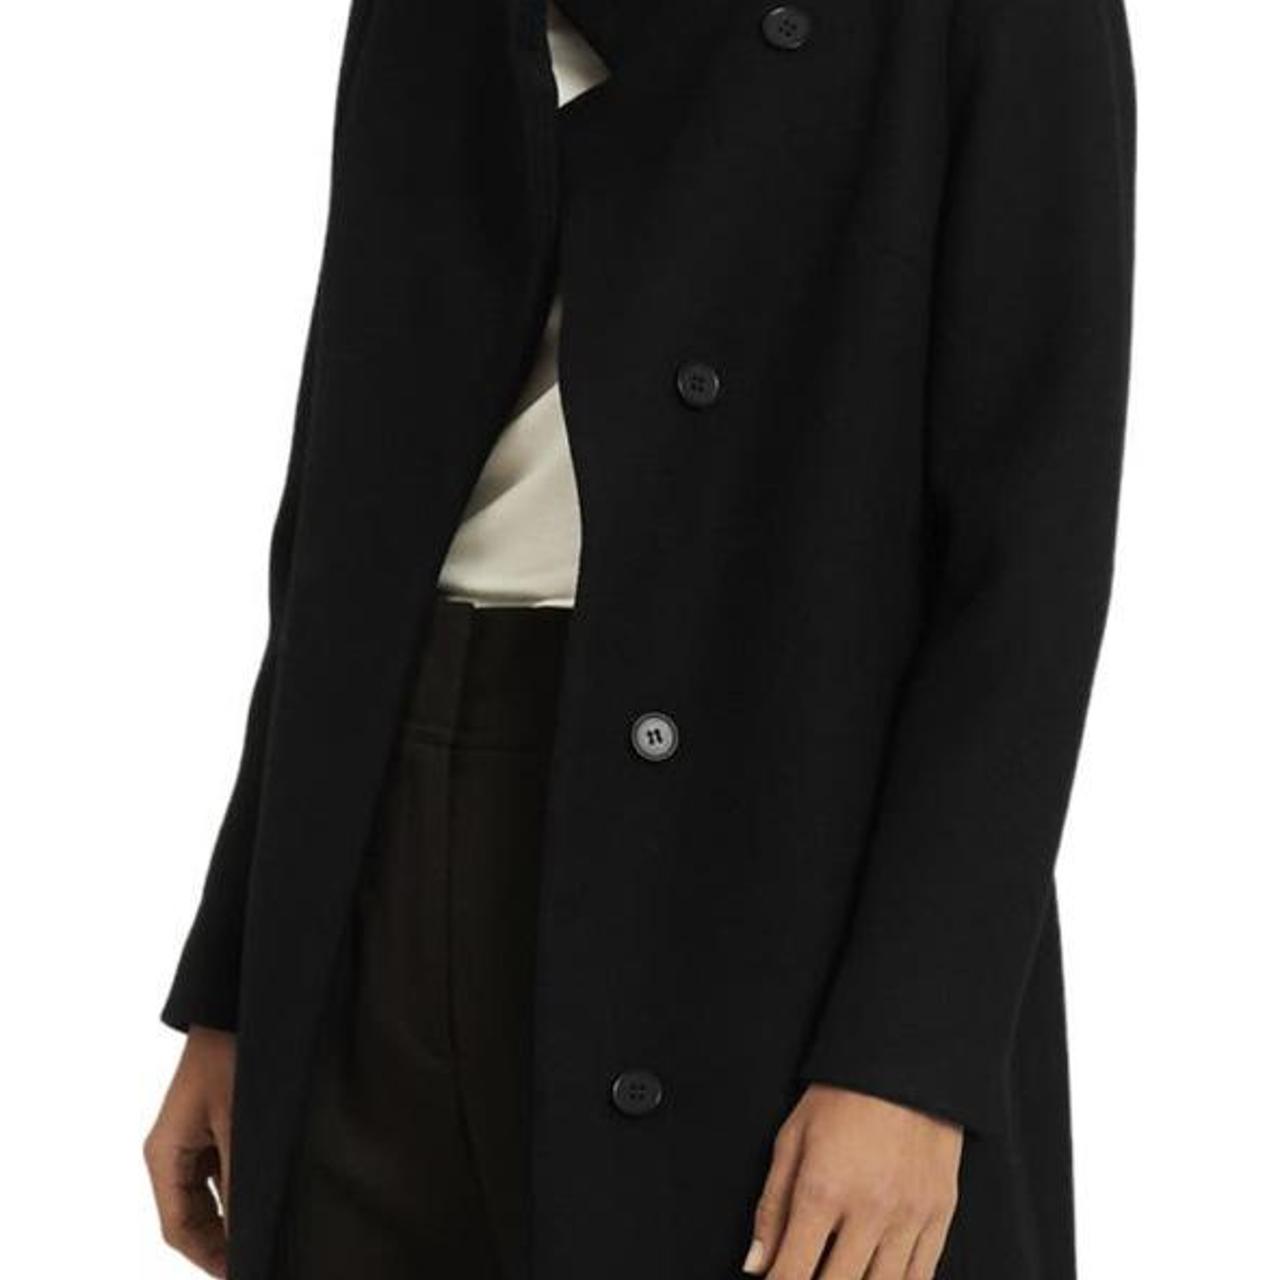 Product Image 4 - Reiss Marcie wool blend coat

Size